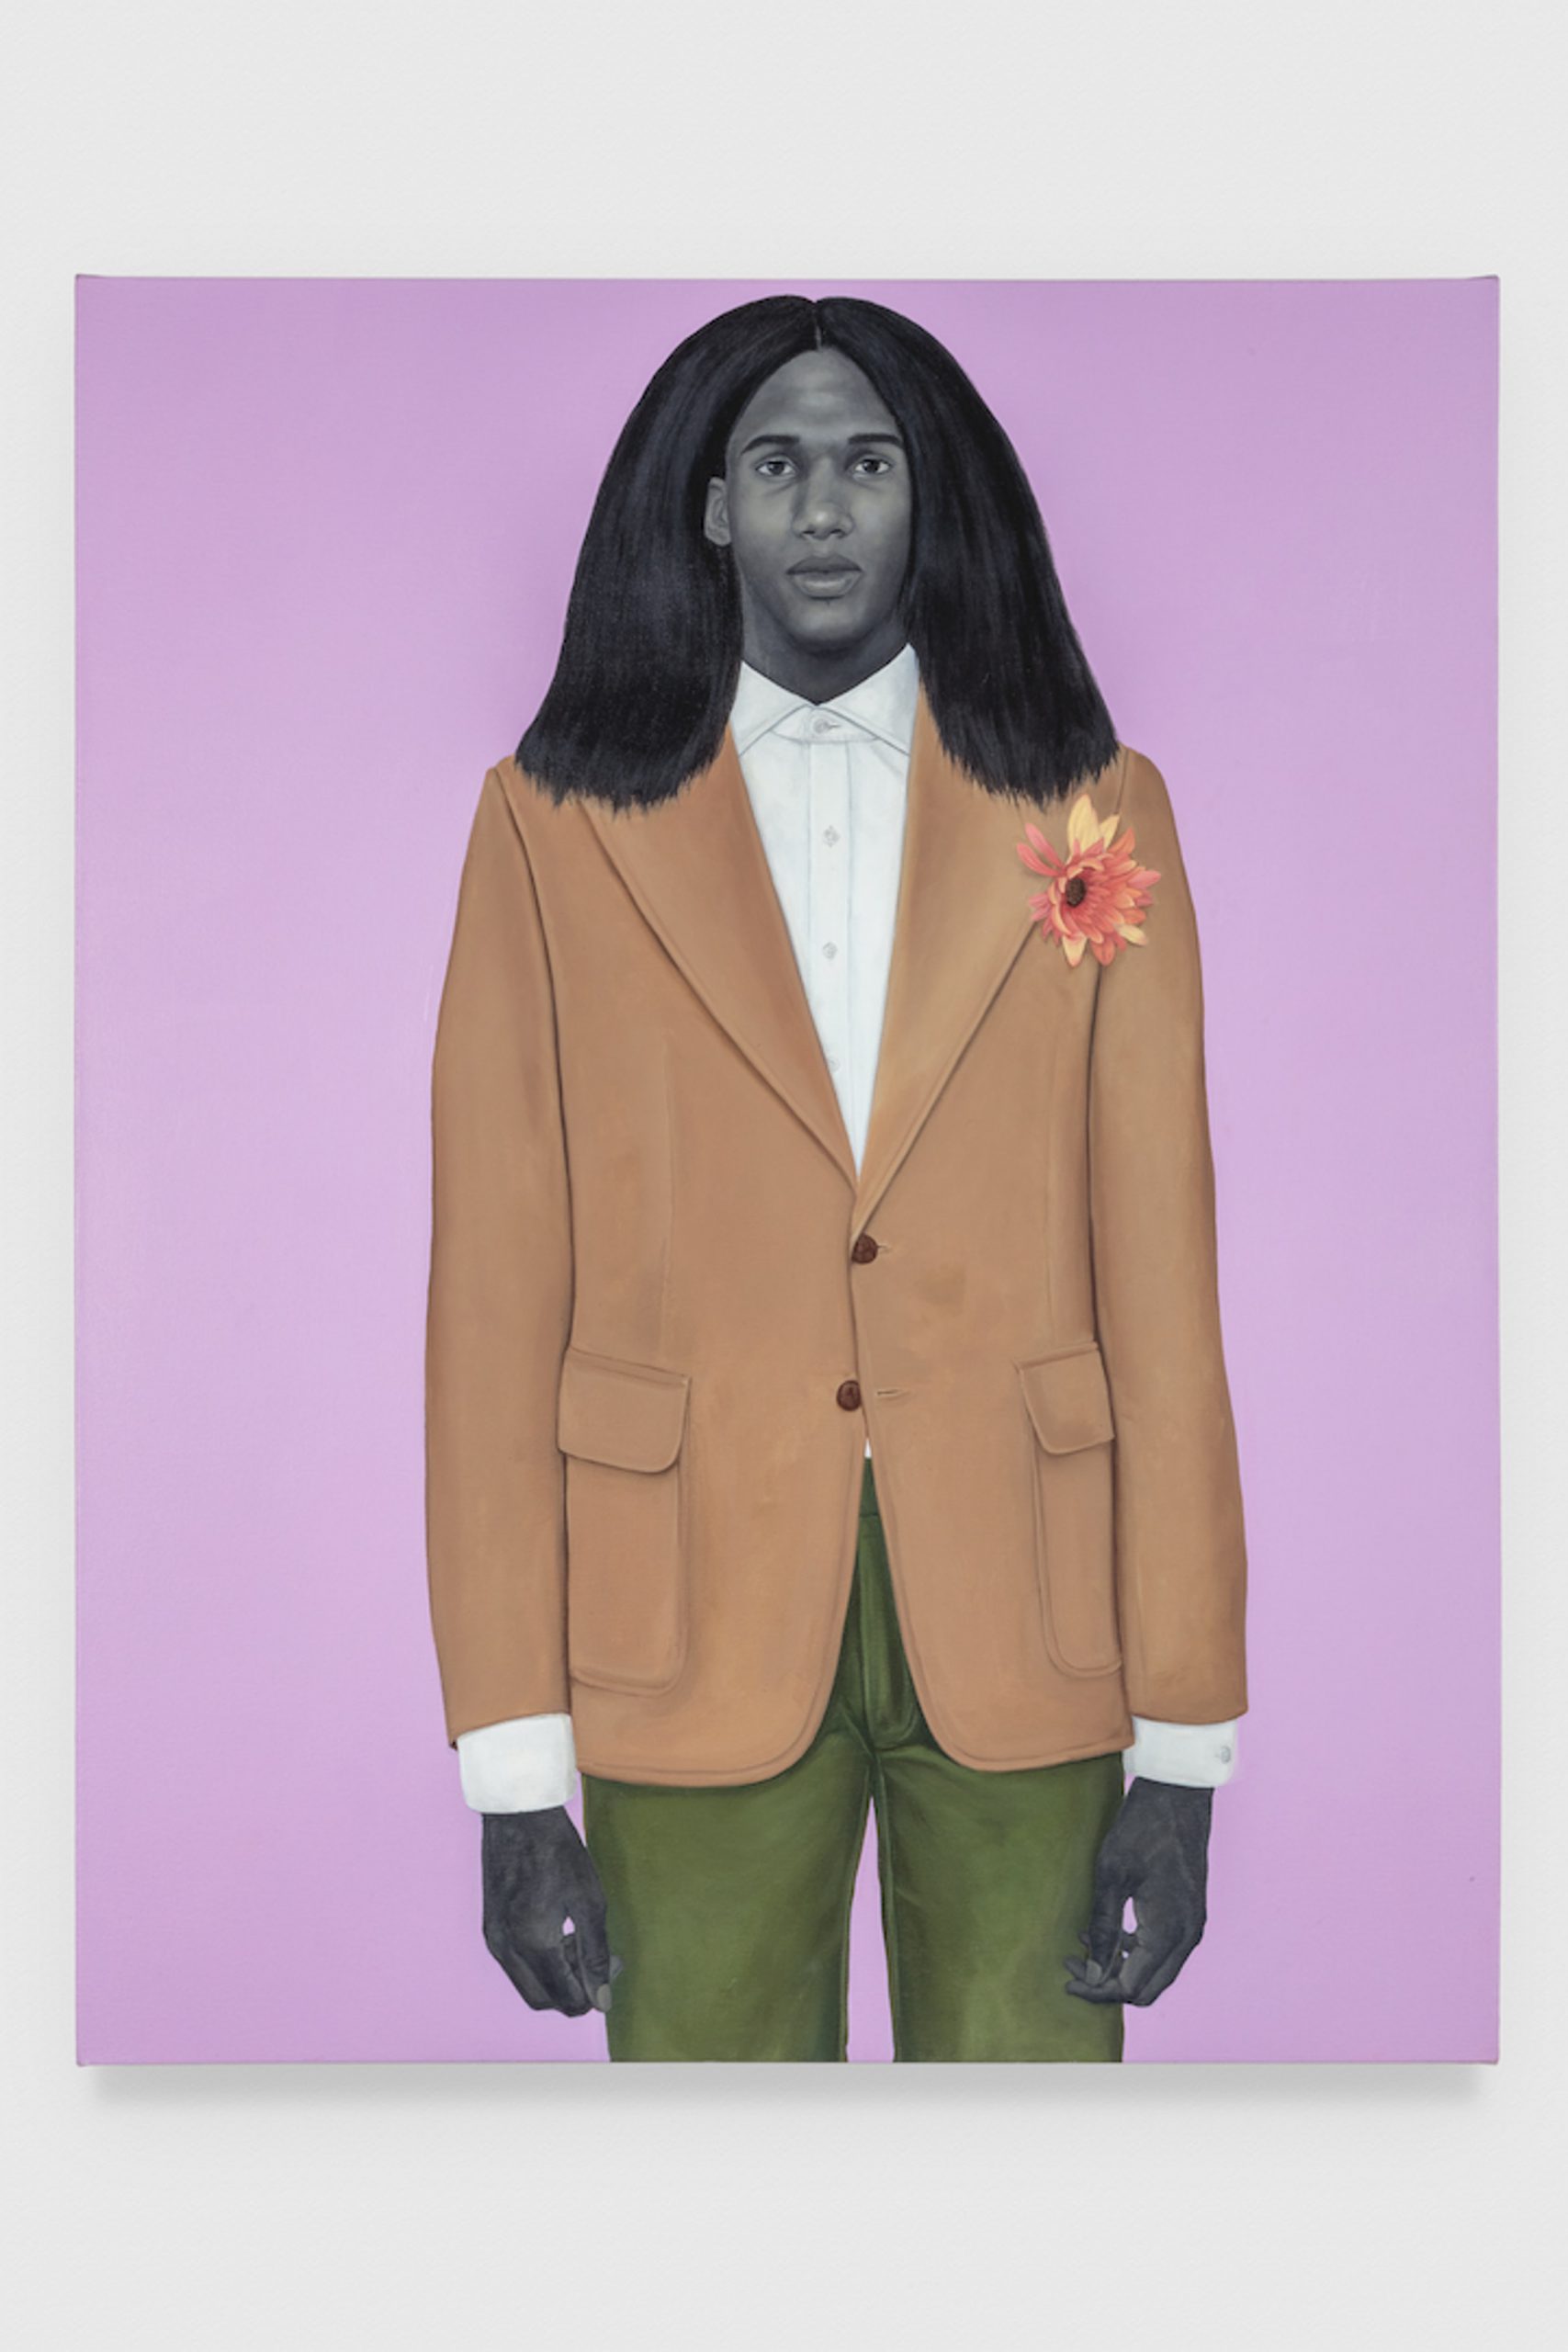 Amy Sherald, When I let go of what I am, I become what I might be (Self-Imagined atlas), 2018. Oil on canvas. 54 x 43 x 2 inches. © Amy Sherald. Courtesy of the artist and Hauser & Wirth. The Eileen Harris Norton Collection. Photo: Charles White.